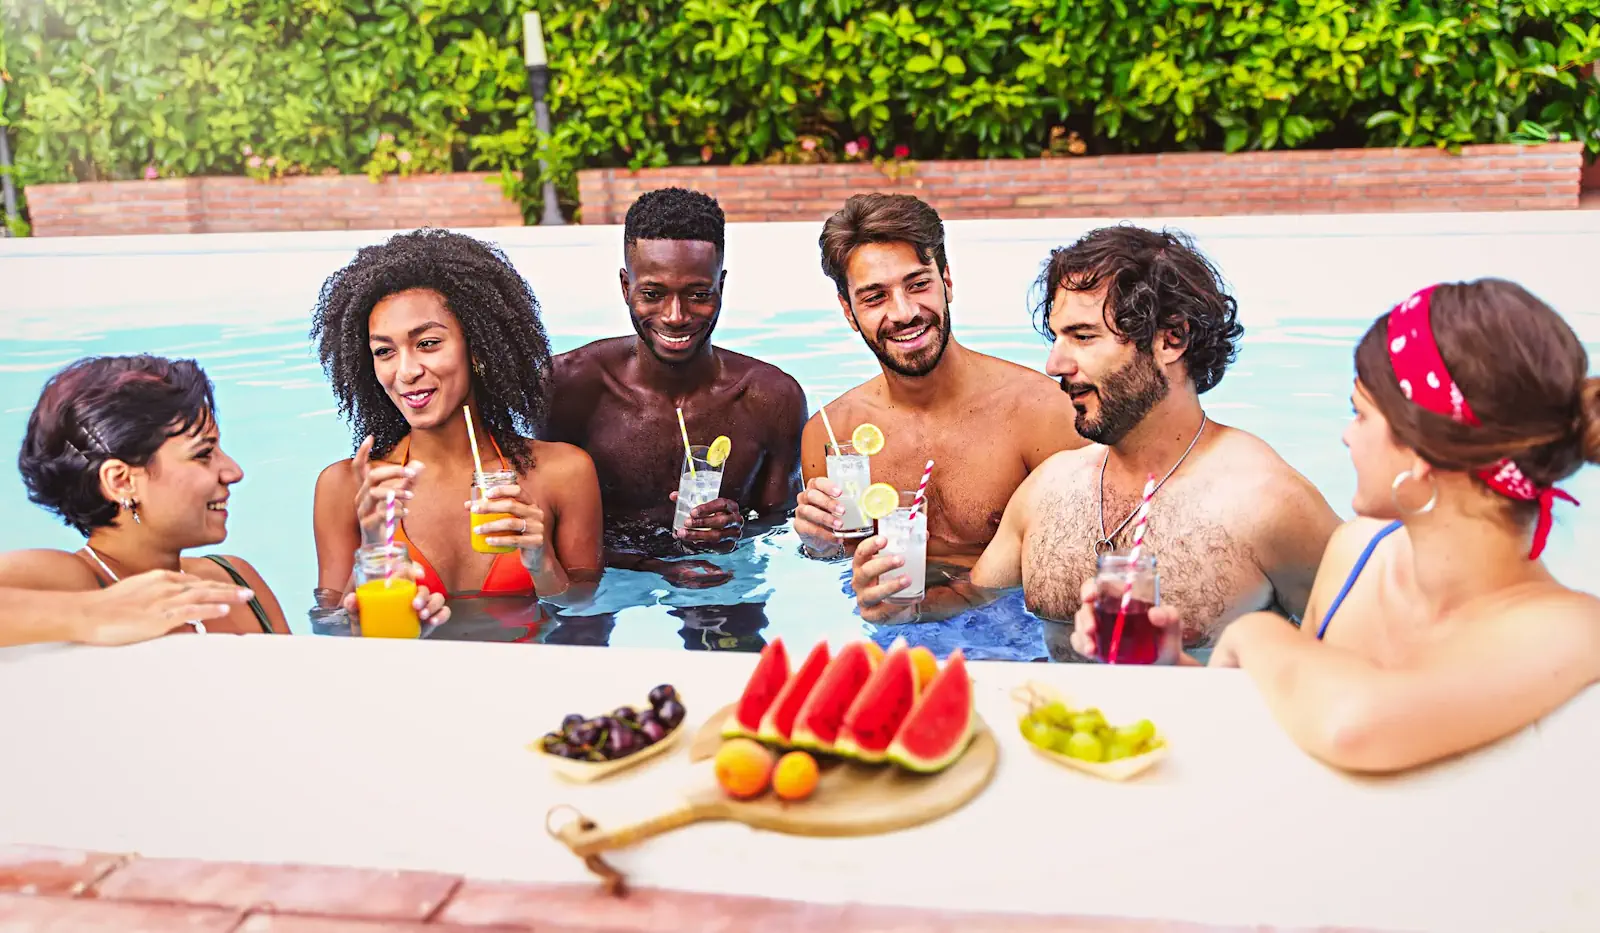 Plan the ultimate pool party with Aviva Pools